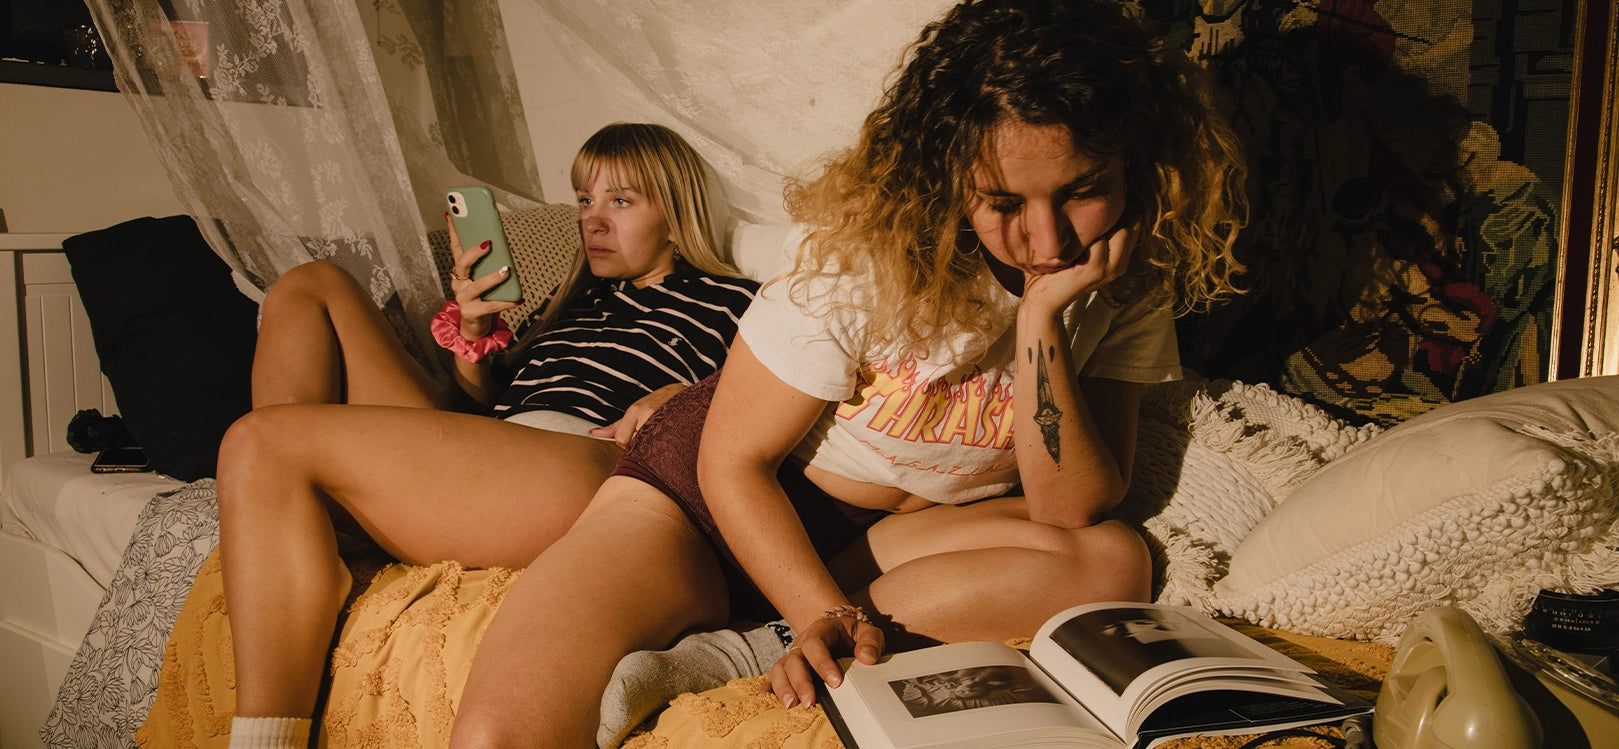 Two young women sitting on bed in underwear, one reading a book, the other on her phone